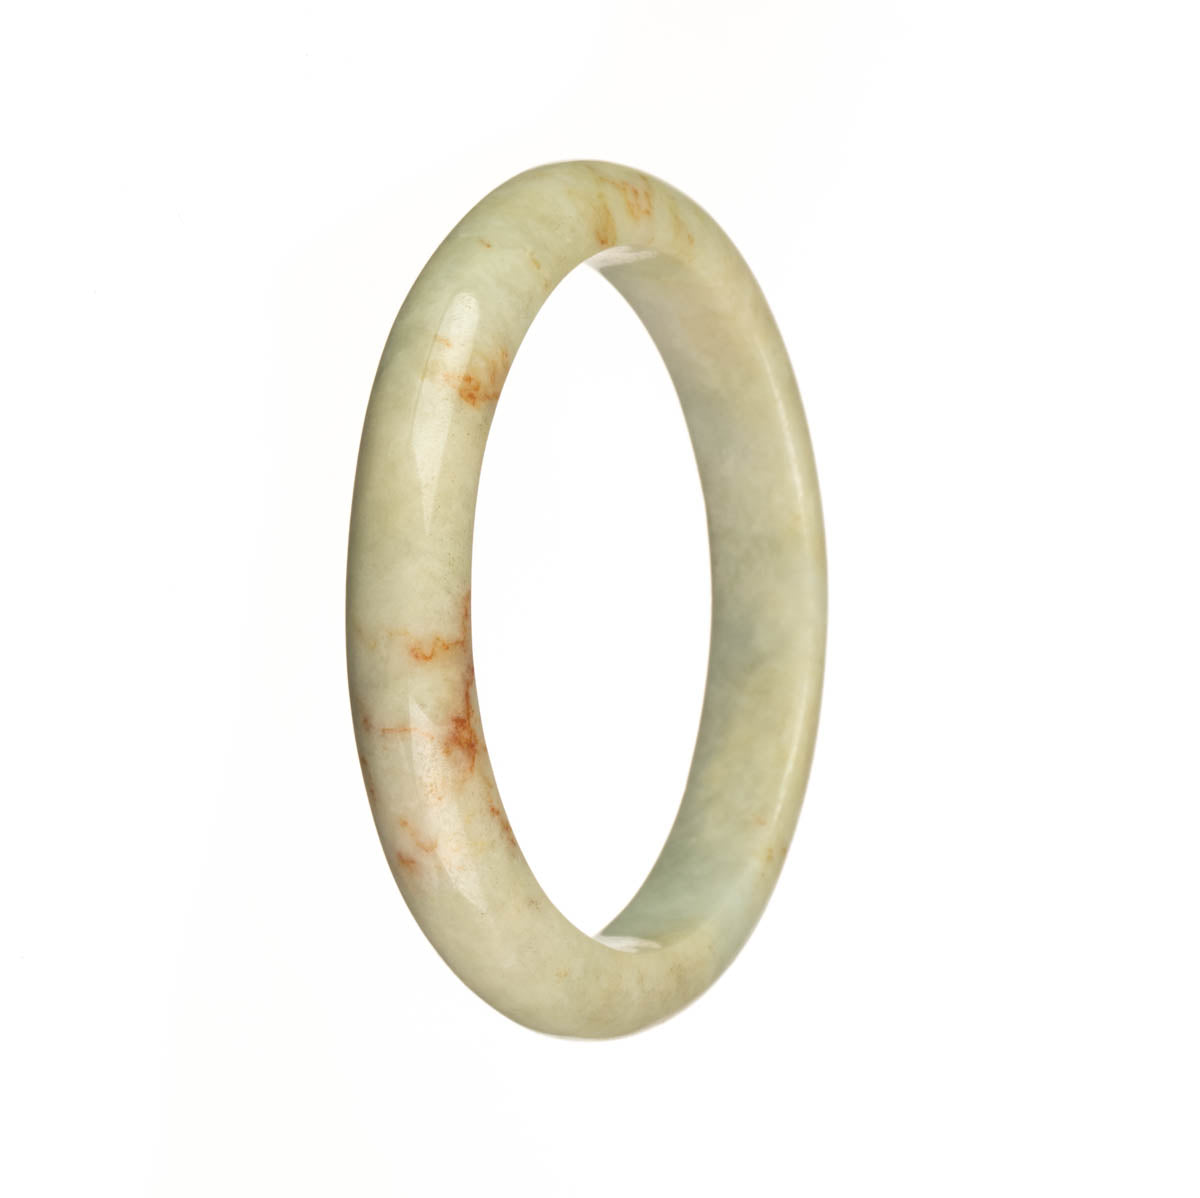 A close-up photo of a bracelet made of certified natural white Burma jade with red patterns. The bracelet is semi-round in shape and measures 56mm in size. It is sold by a brand called MAYS.